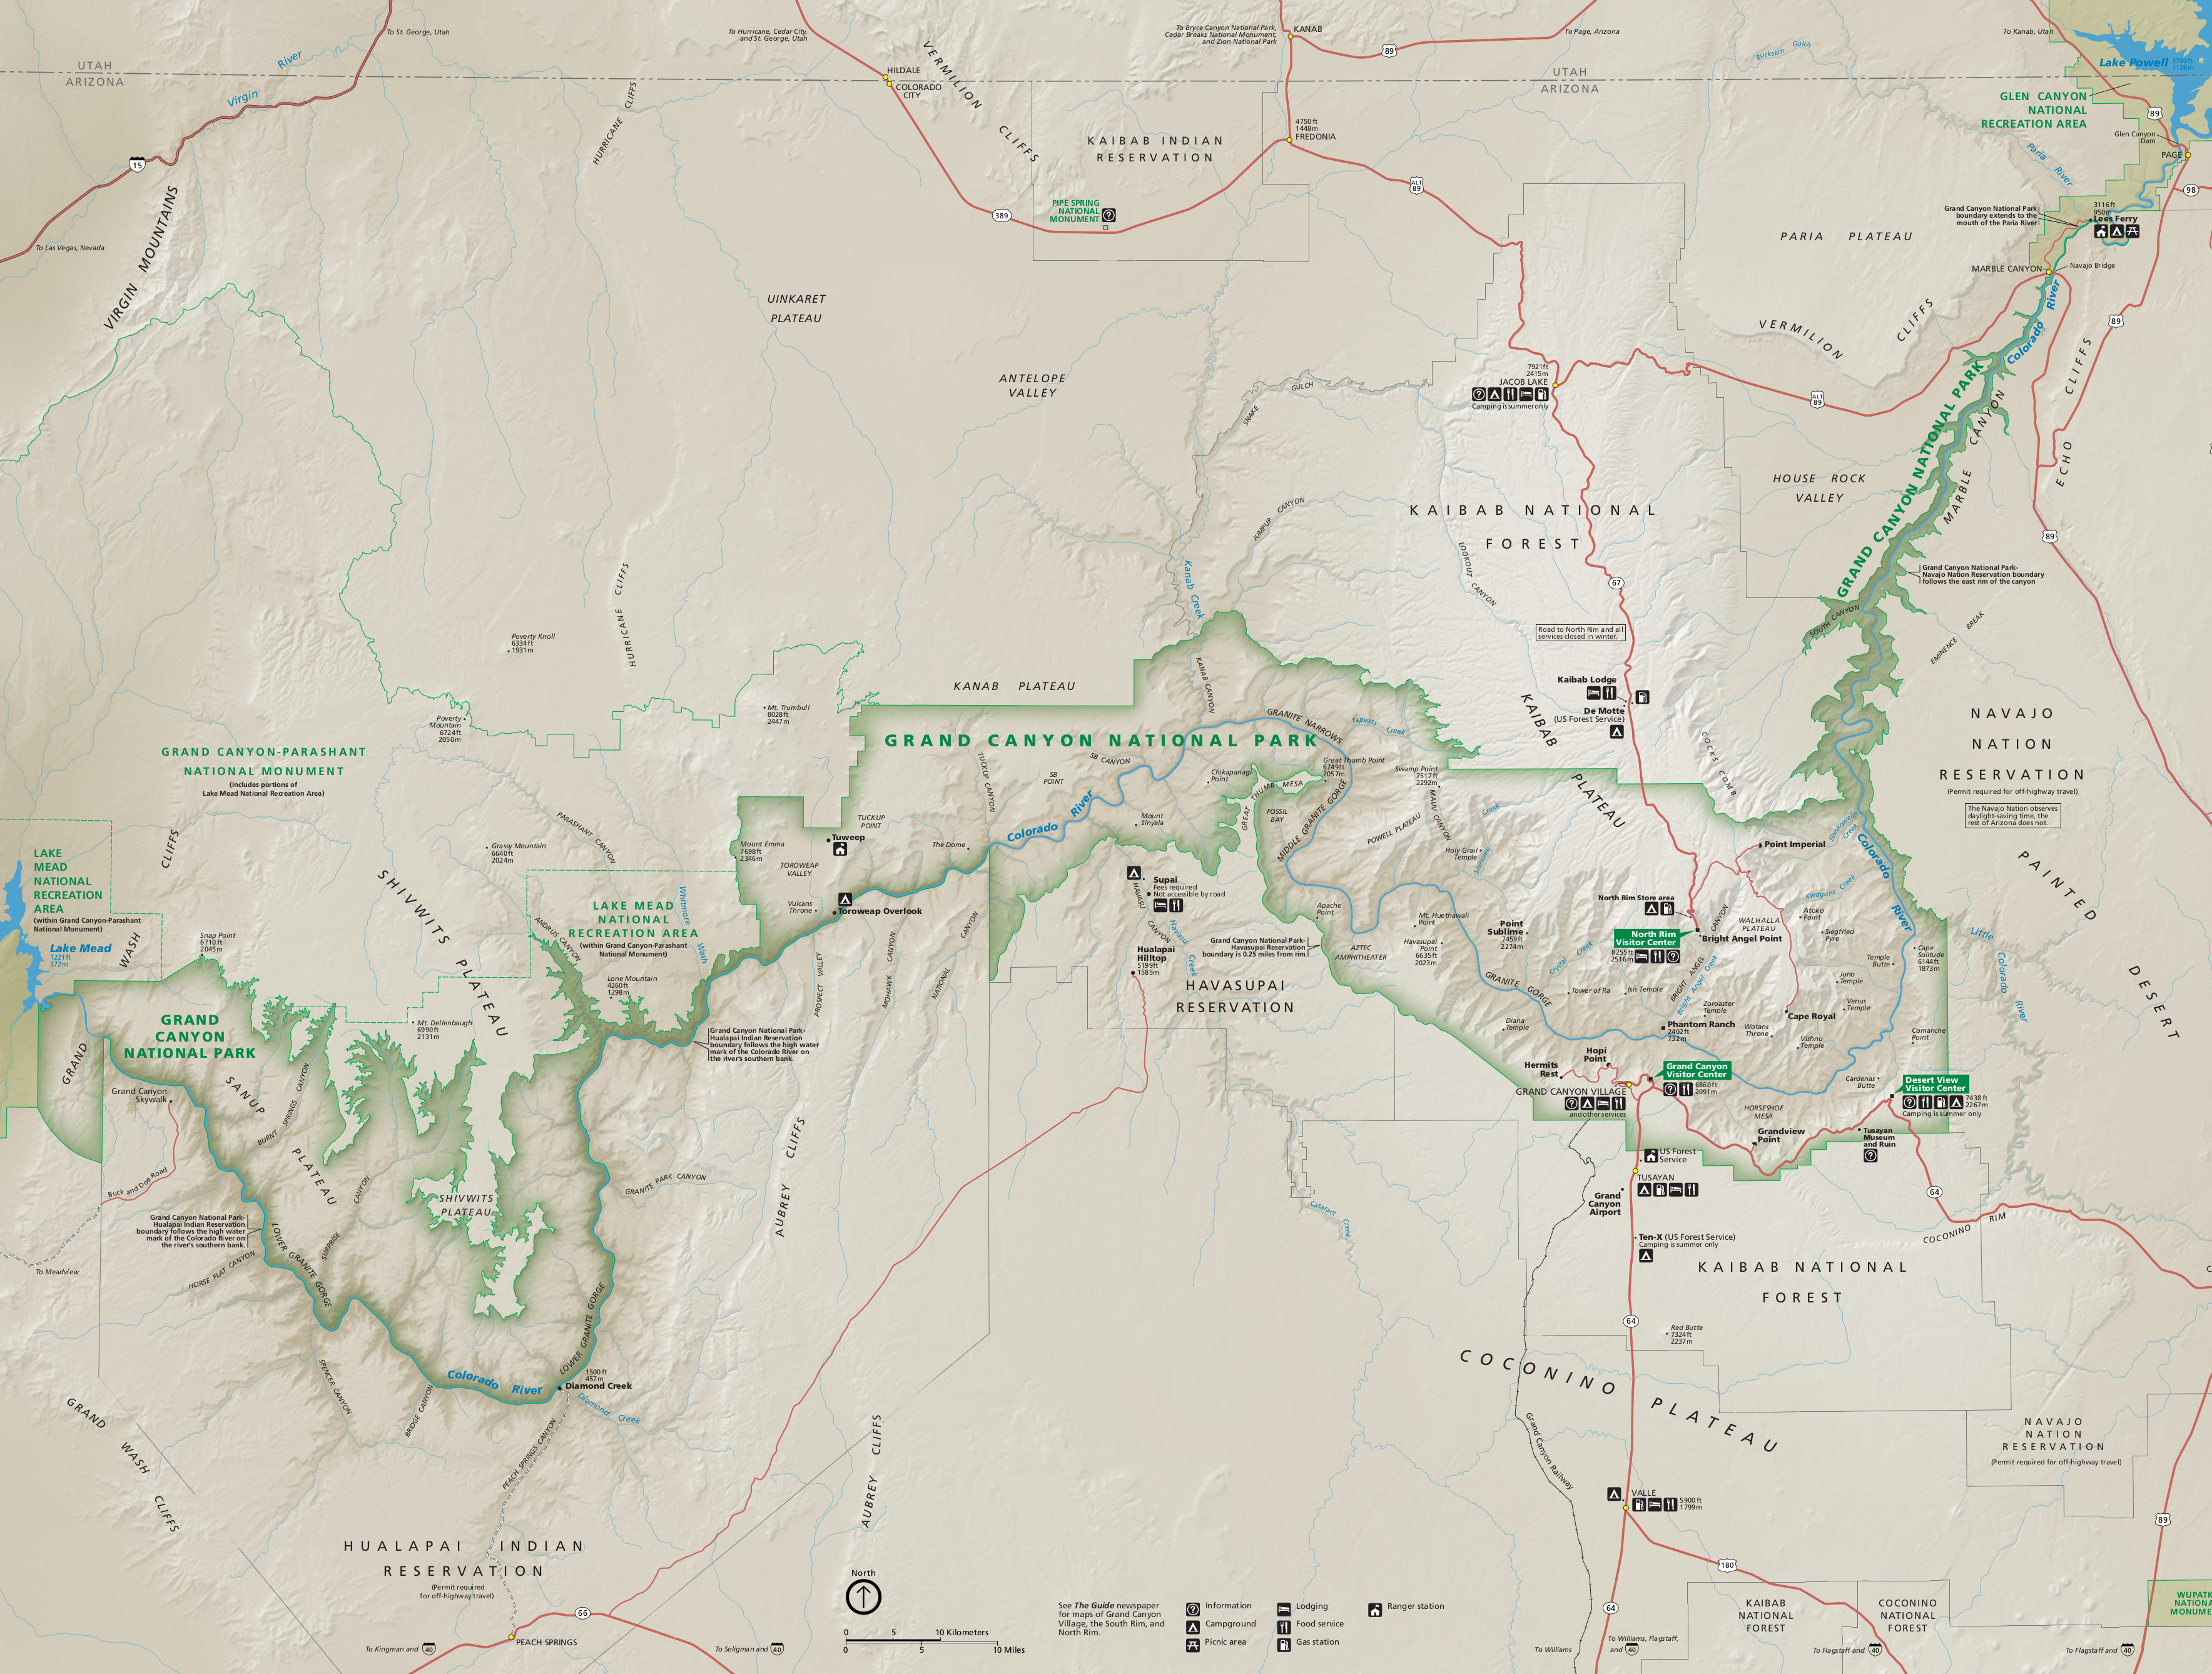 1,600 high resolution National Park maps available for free download